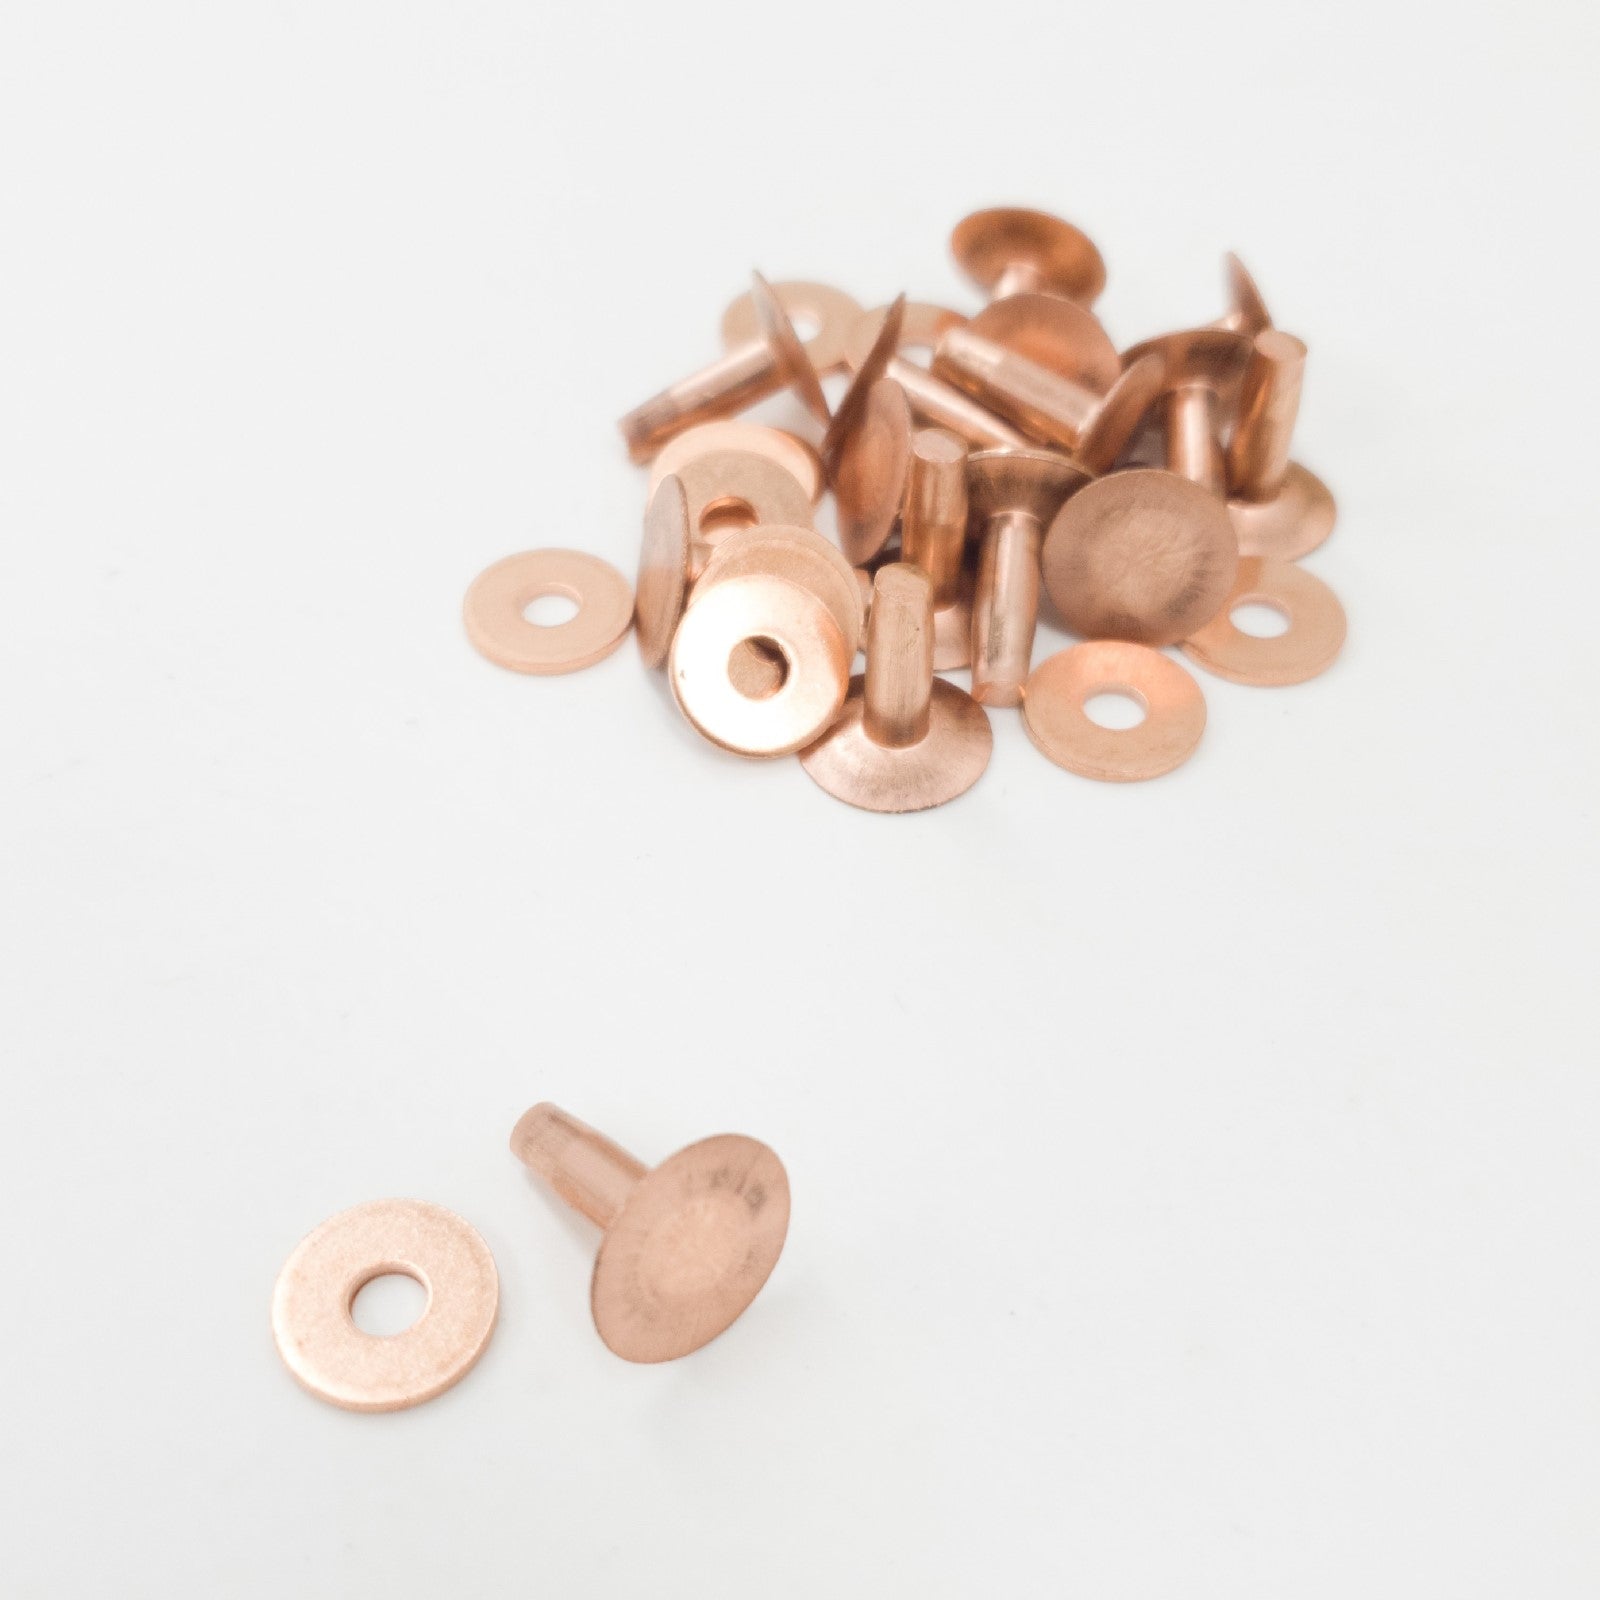 JUNESunShine 154Pcs Copper Rivets for Leather, 9 Smooth Leather Rivets  Without Pattern, Pure Copper Rivets and Burrs for Leather Work Jeans Jacket